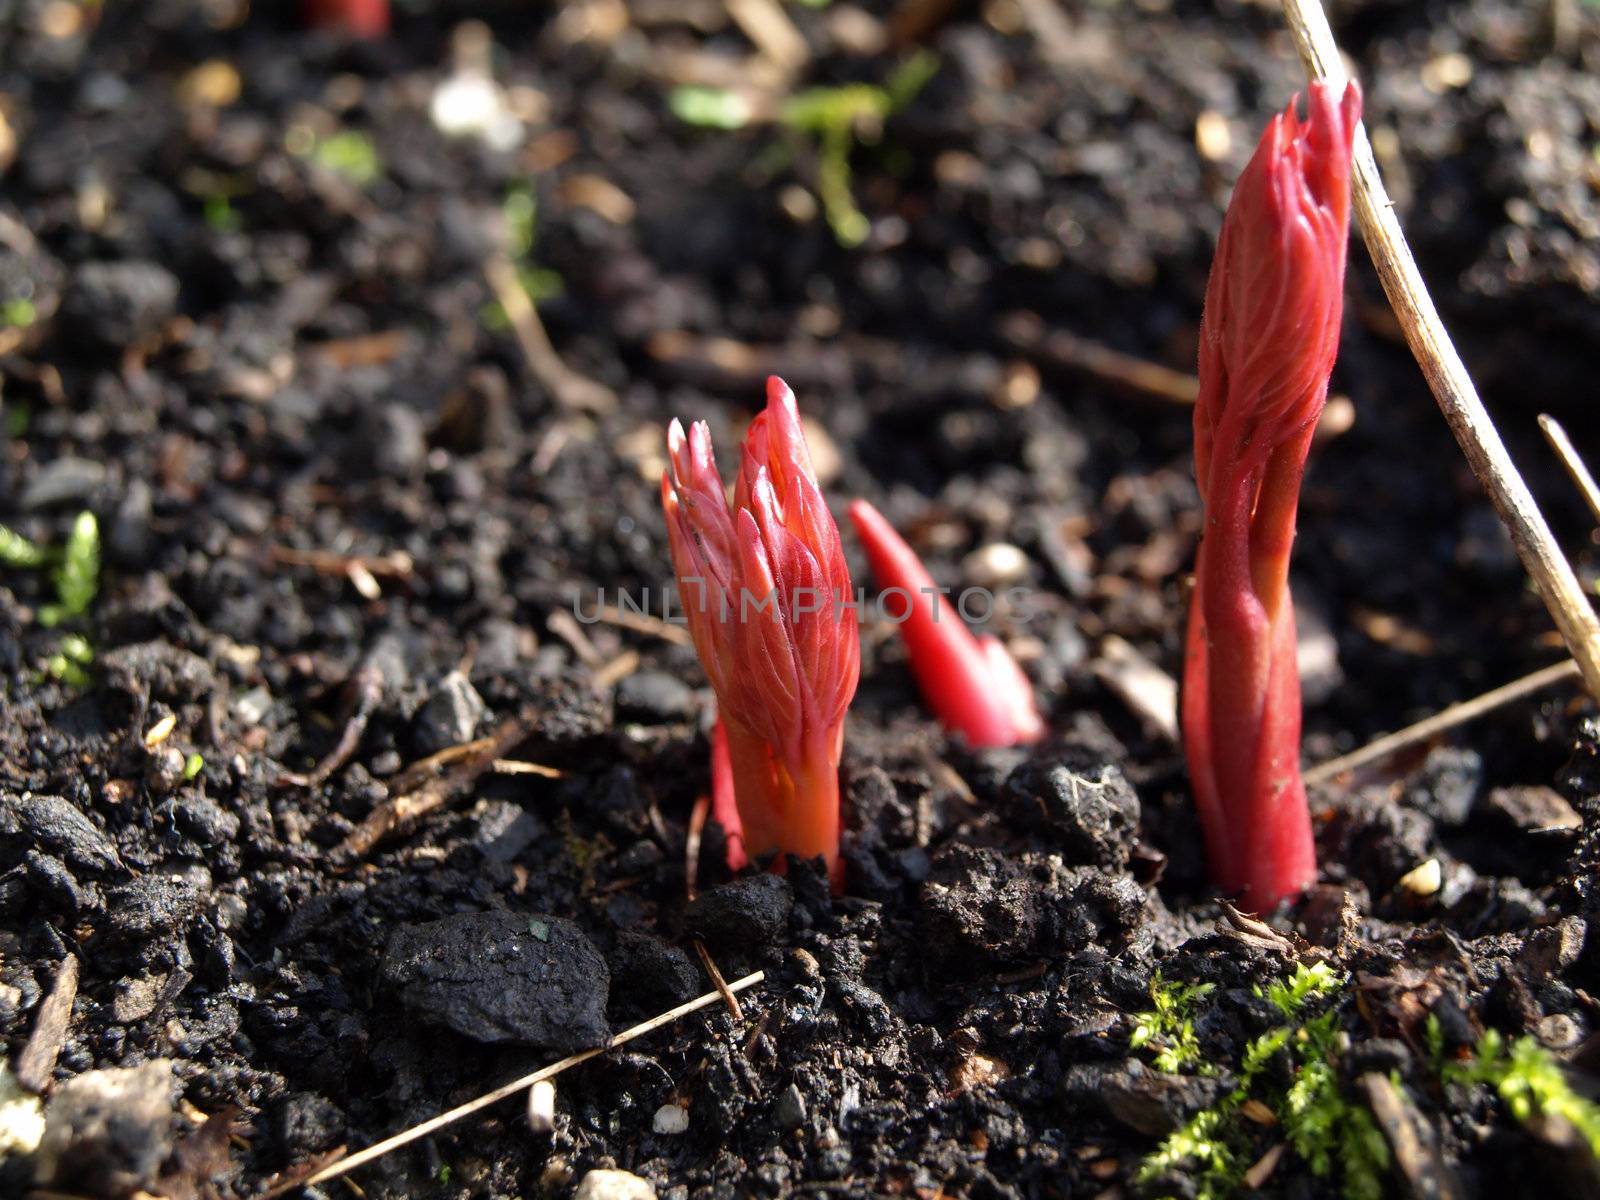 Spring arrives as a small red leaved plant emerges from the ground.